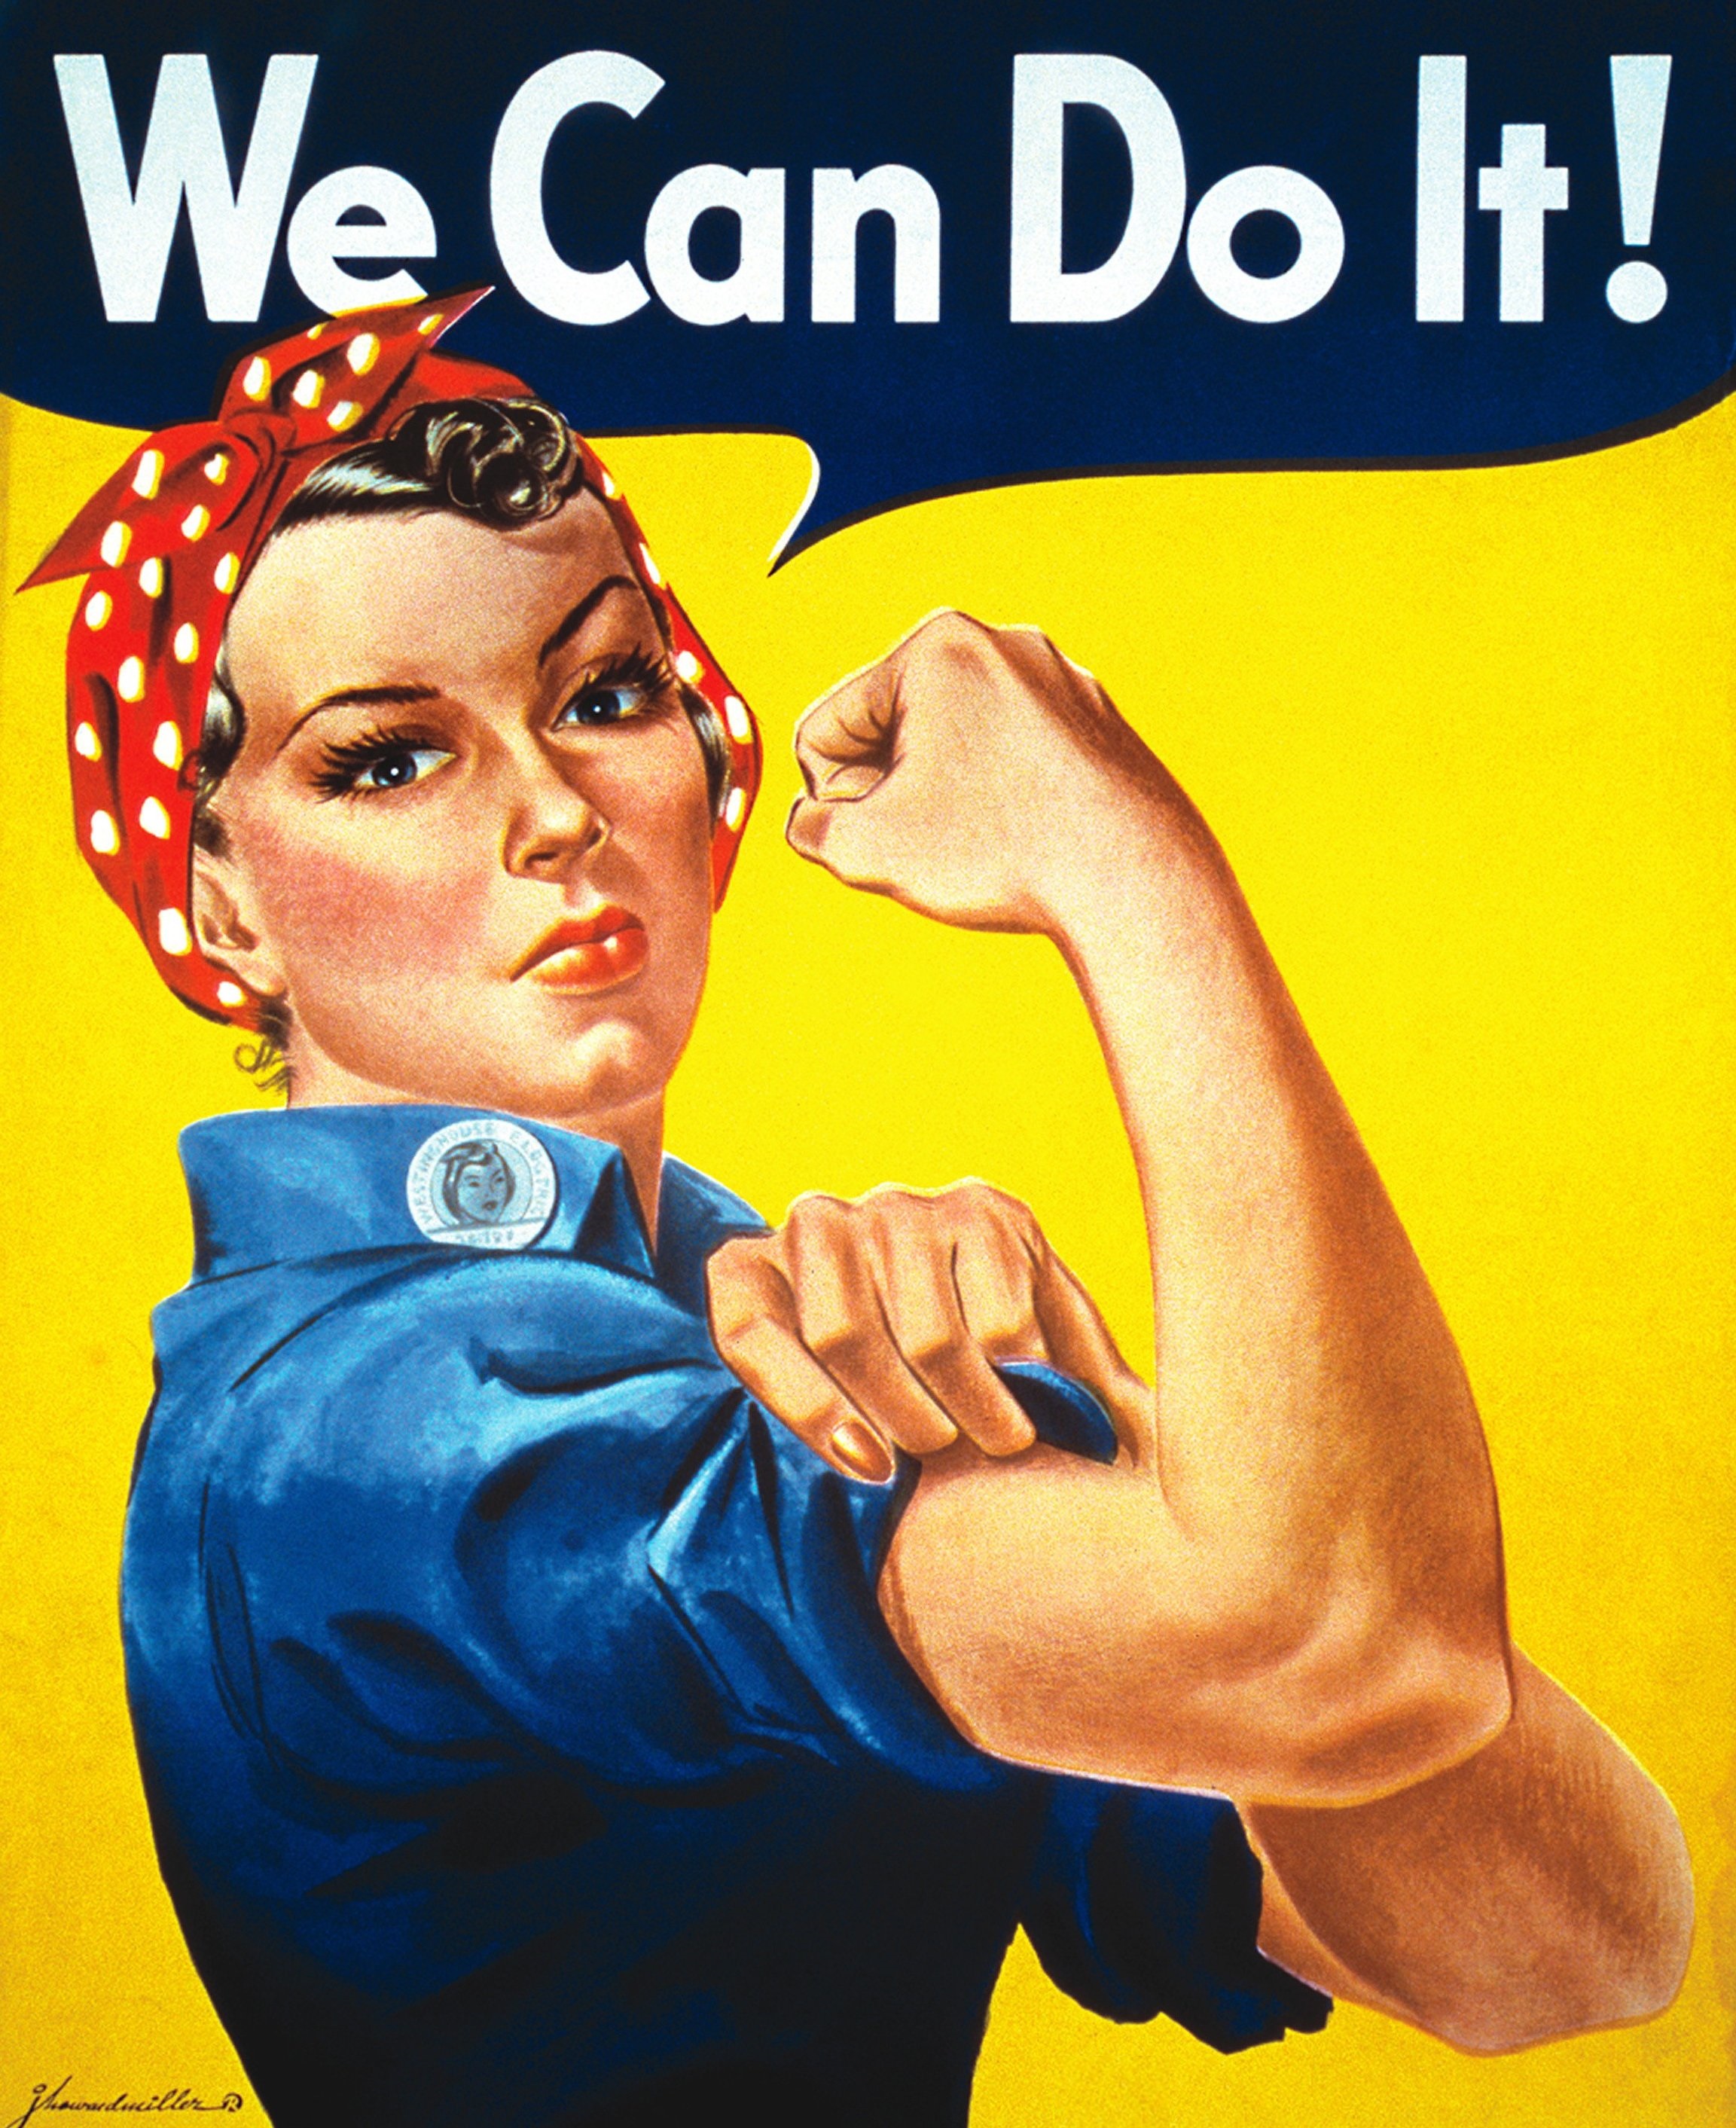 We Can Do It Google image adapted from http://laminaposter.com/1658/poster-we-can-do-it.jpg